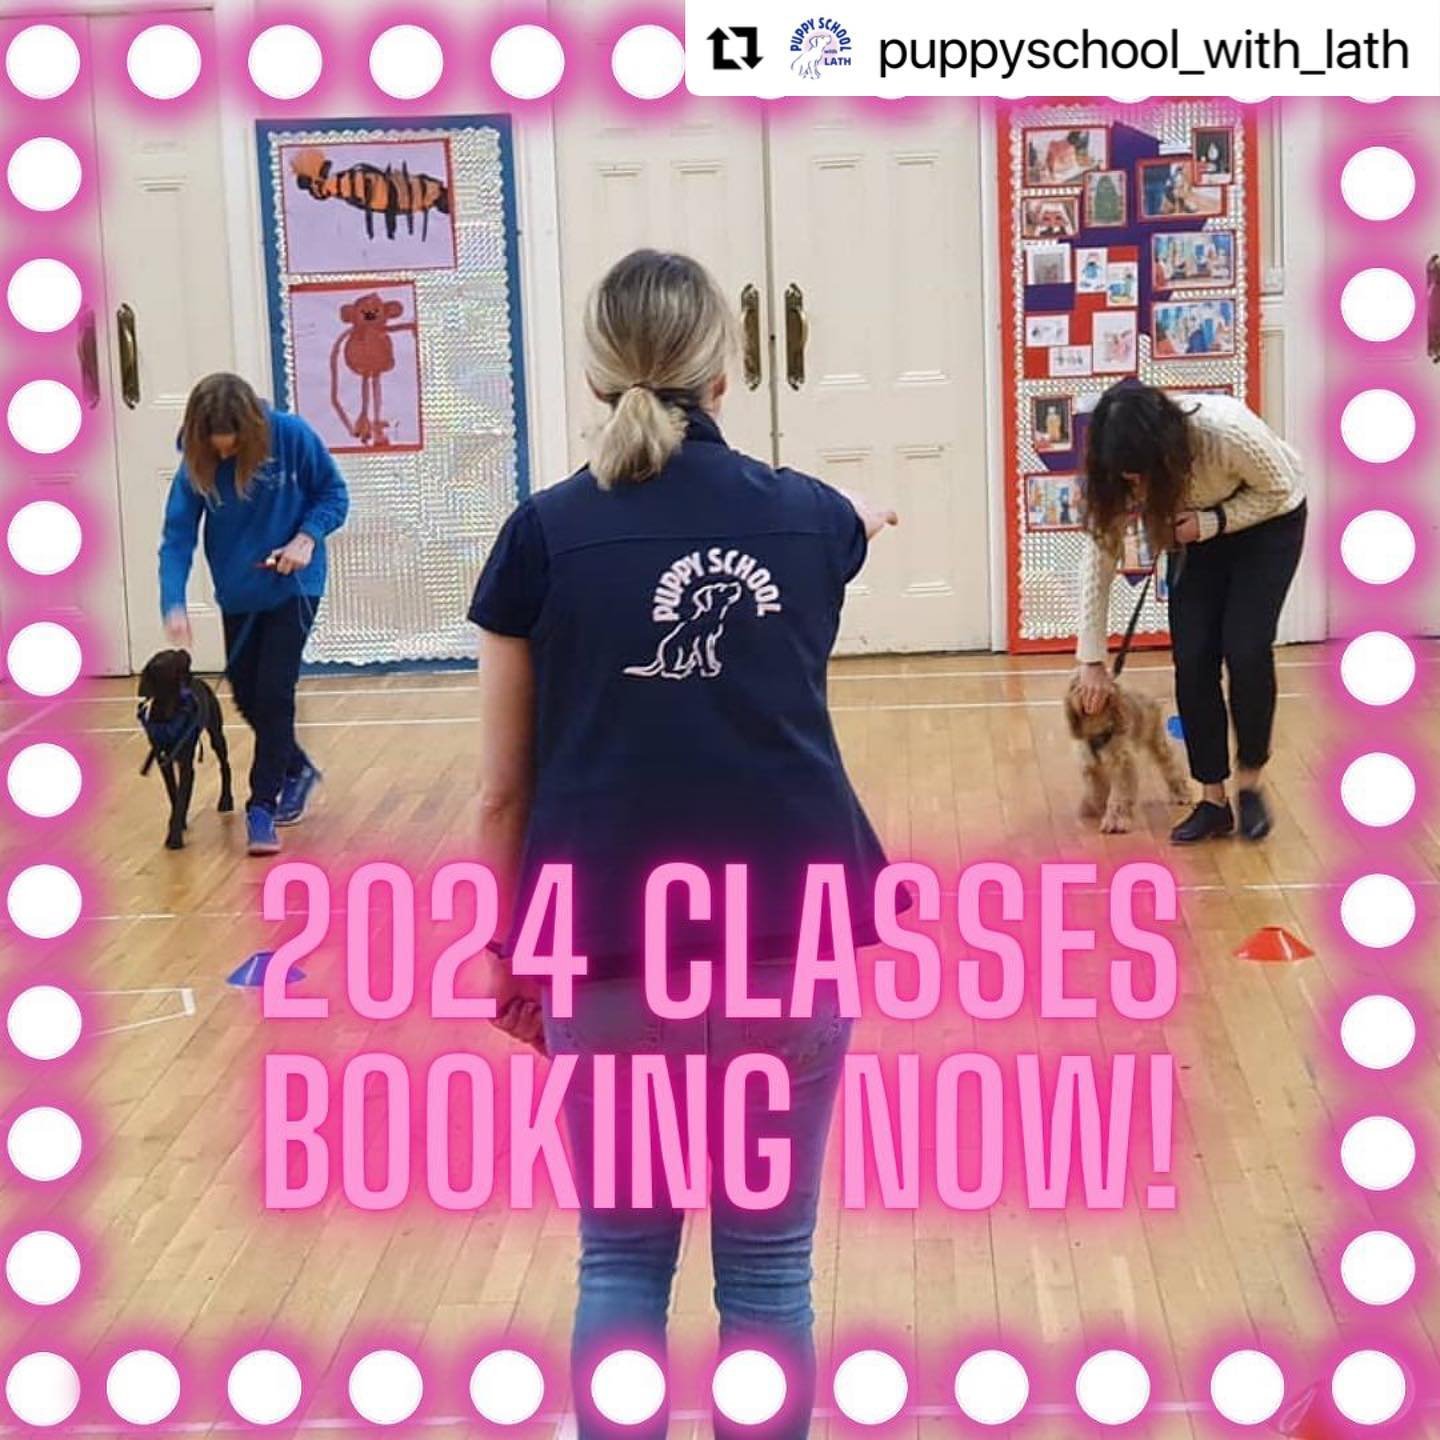 💕🐶 2024 Puppy School classes BOOKING NOW!! 🐶💕

Places selling fast for next year already! Grab your pup a spot on one of our @puppyschooluk six week puppy training and socialisation courses, for vaccinated puppies 20 weeks and under.

Our schools